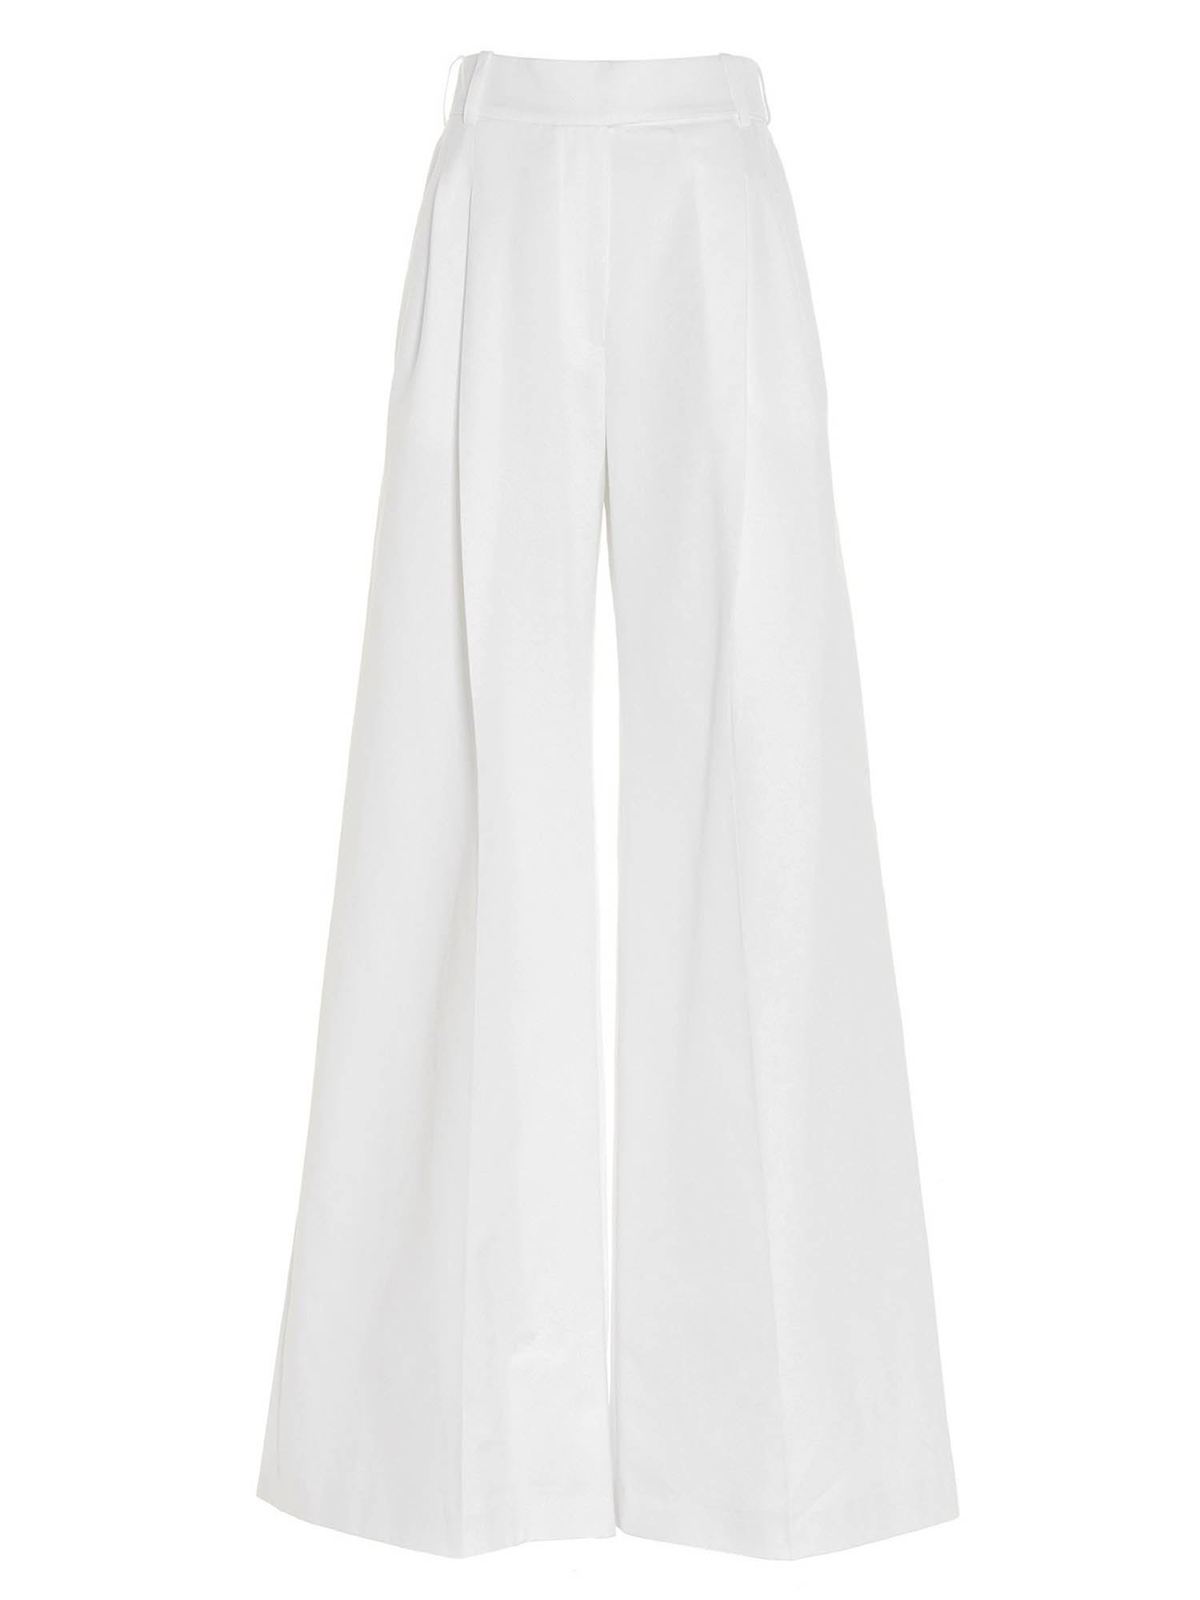 ALEXANDRE VAUTHIER PALAZZO PANTS IN WHITE